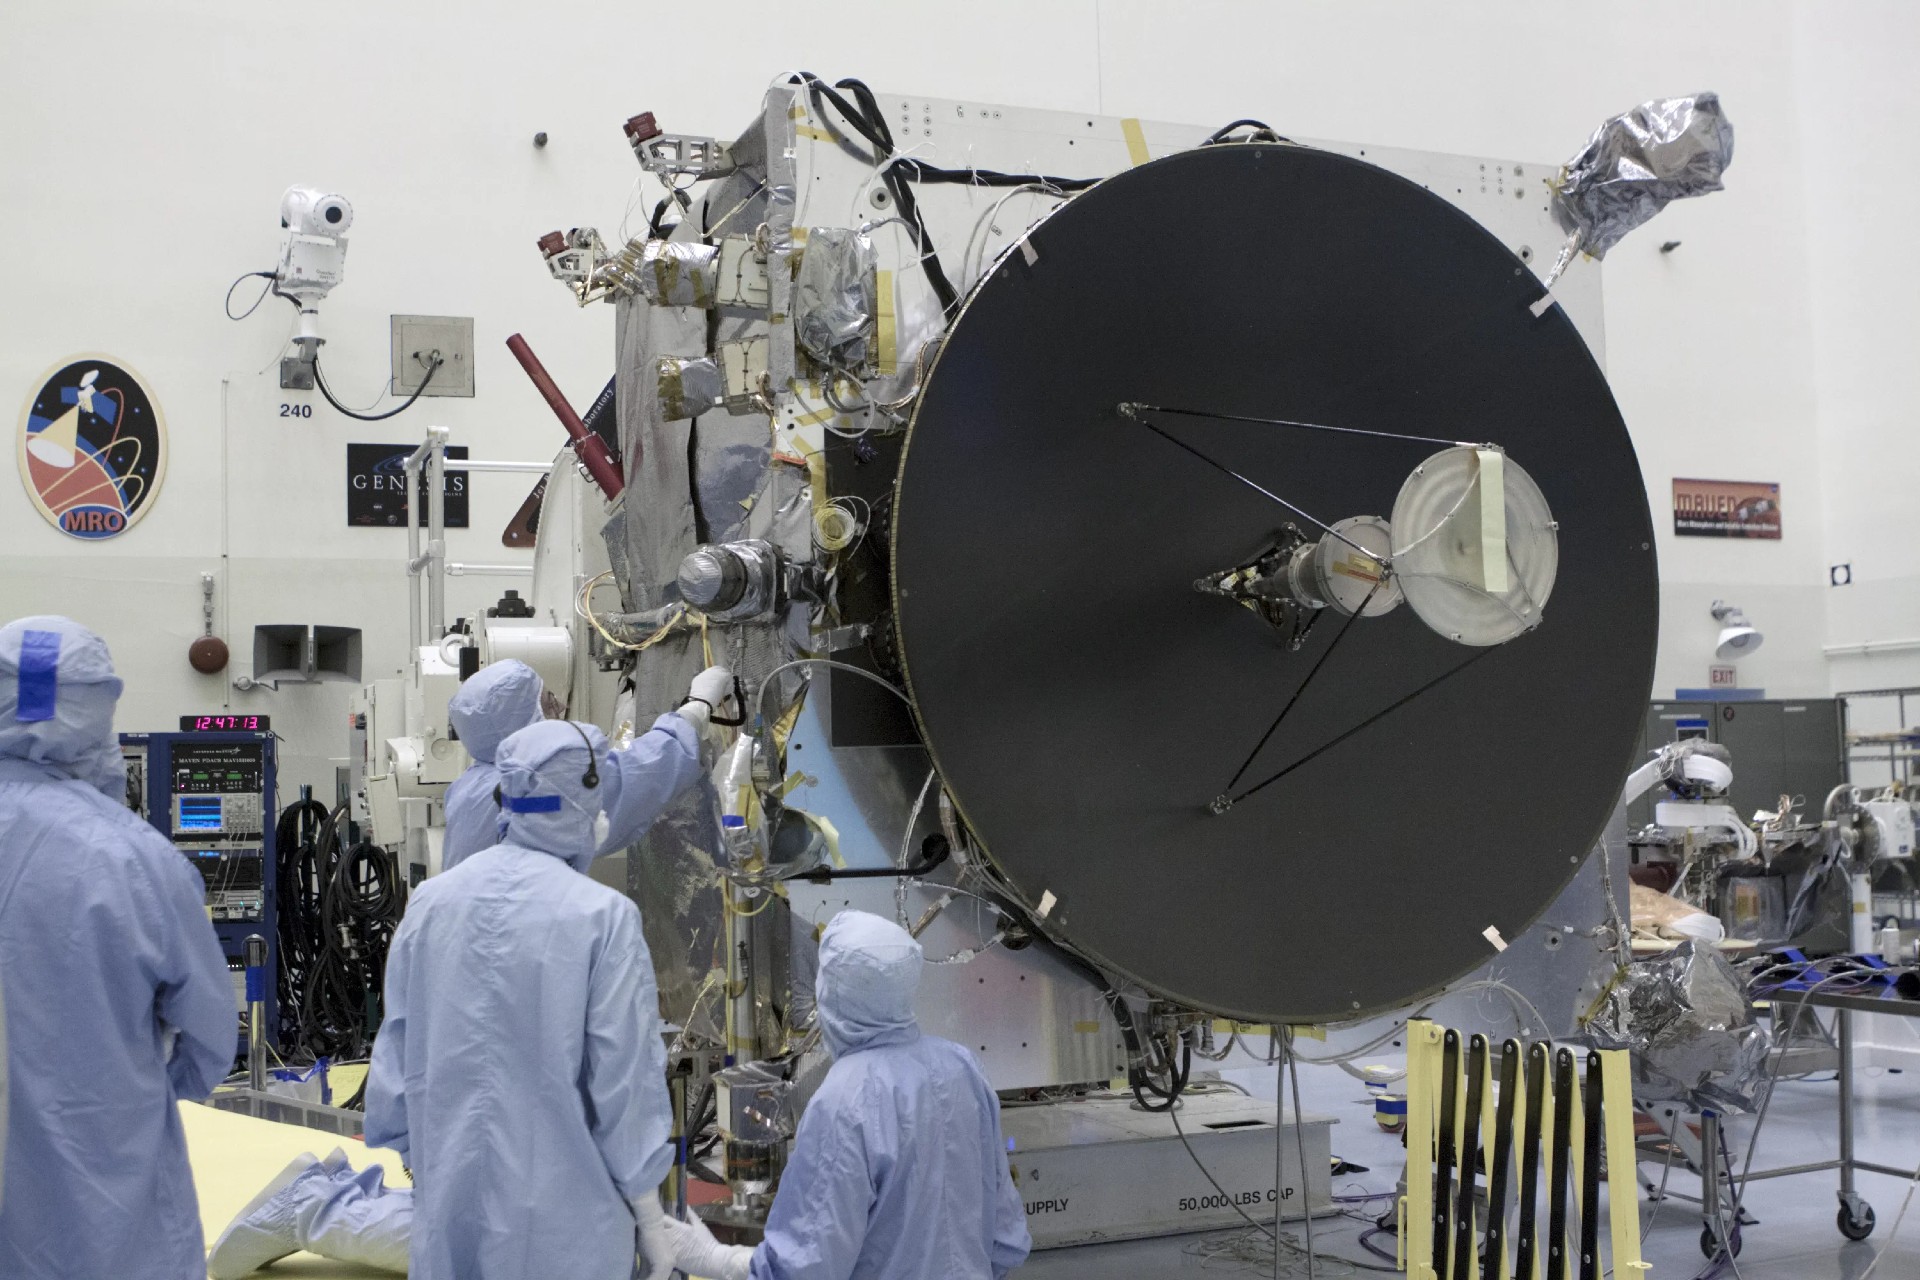 Scientists in blue protective suits work on a large satellite or spacecraft with a prominent circular dish in a laboratory setting.